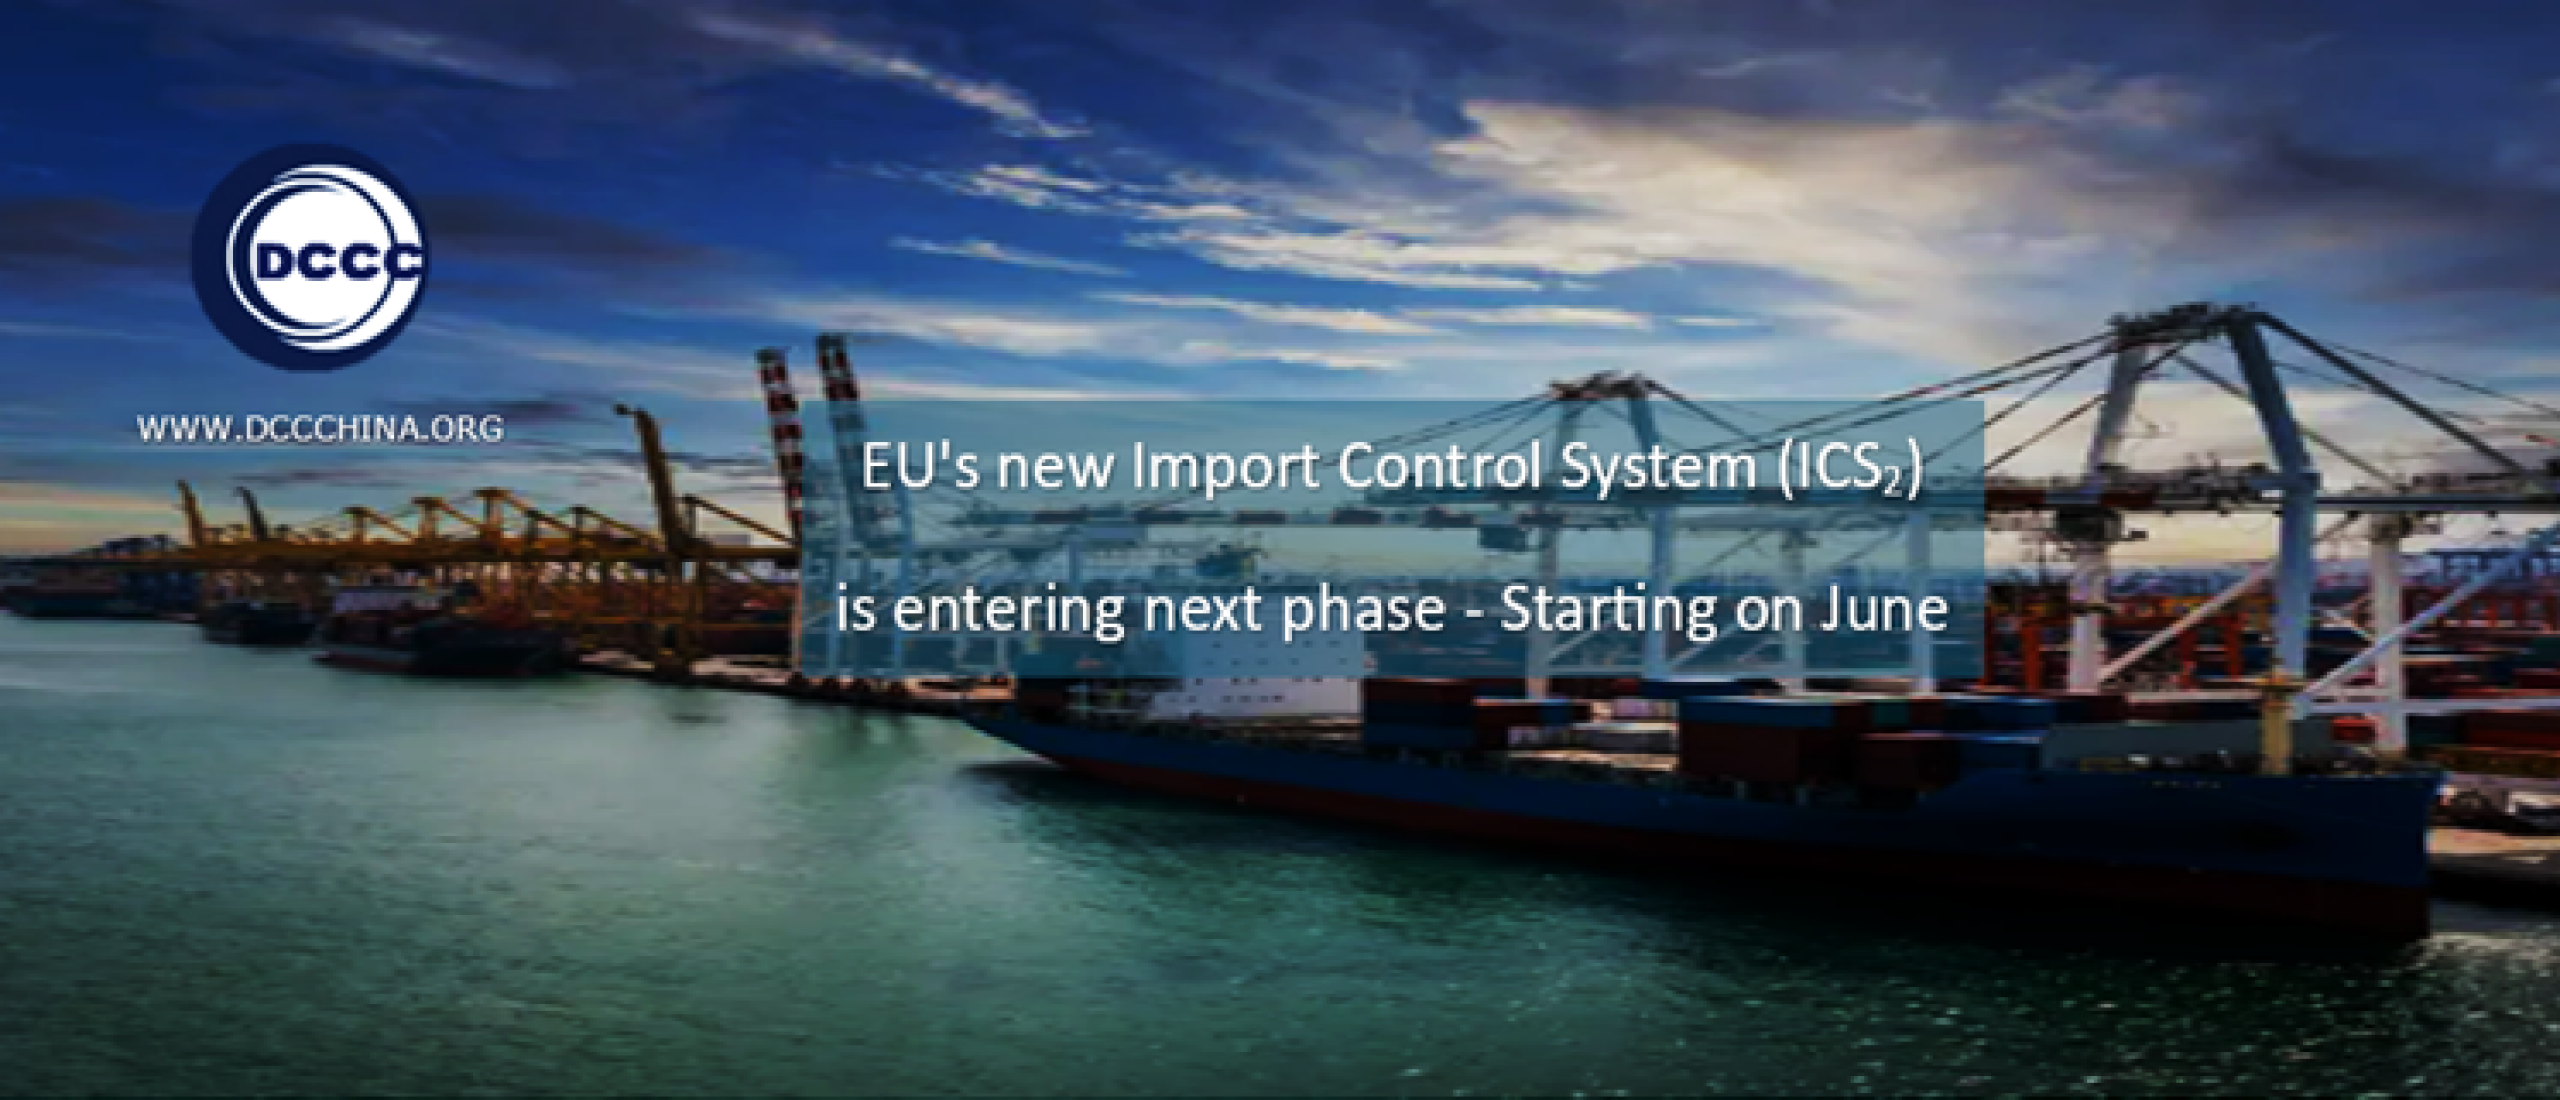 What are the implications of EU’s new Import Control System (ICS2)?